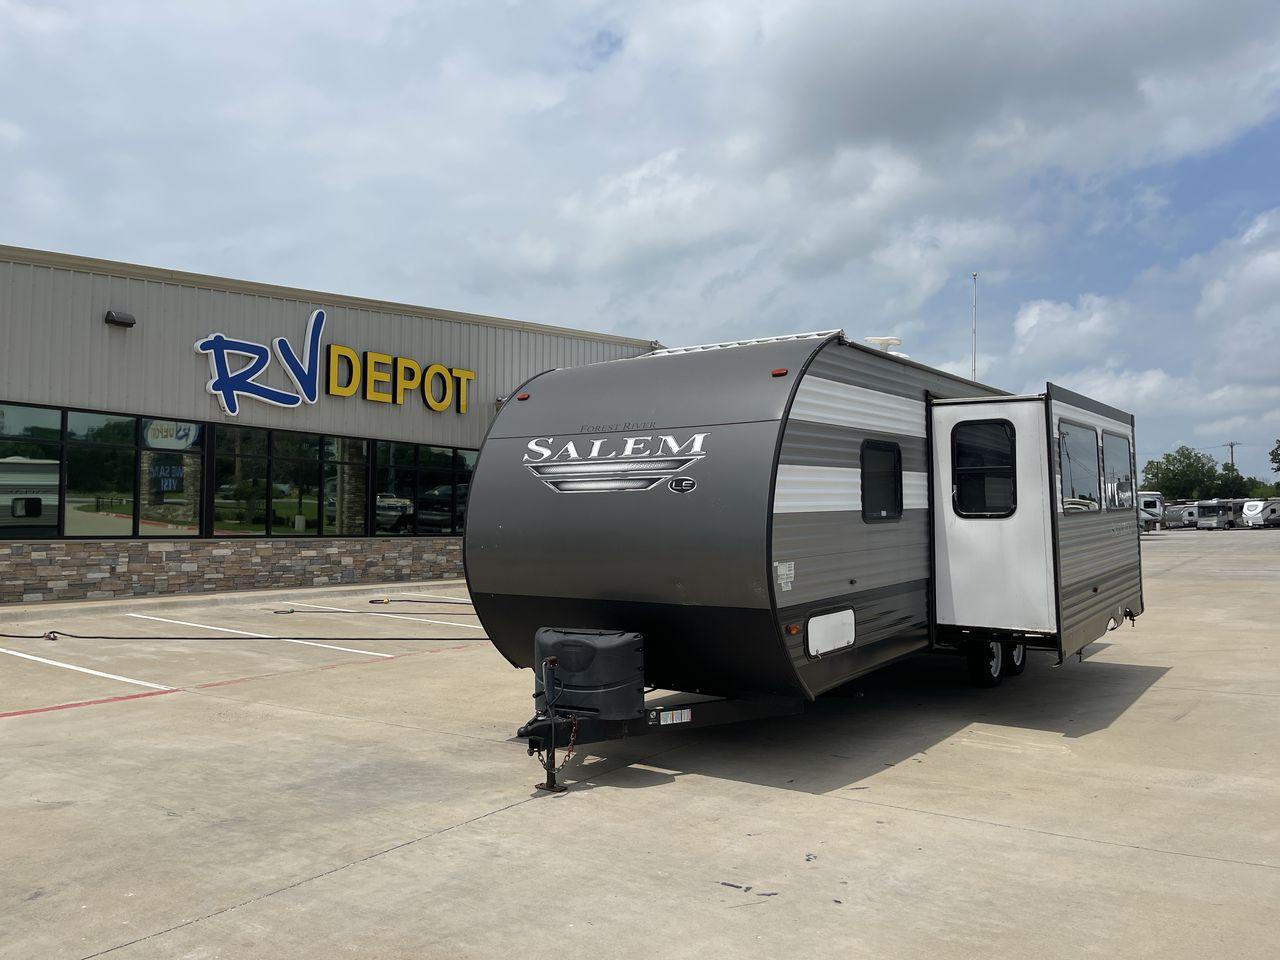 2019 FOREST RIVER SALEM 26DBLE (4X4TSMB23KA) , Slides: 1 transmission, located at 4319 N Main St, Cleburne, TX, 76033, (817) 678-5133, 32.385960, -97.391212 - This 2019 Forest River Salem 26DBLE is a single-slide travel trailer that offers sleeping space for up to 10 people! This Salem is designed with a straightforward and convenient floorplan featuring a front bedroom, central living and kitchen, and rear bunk and bath. The front bedroom can accommod - Photo #0